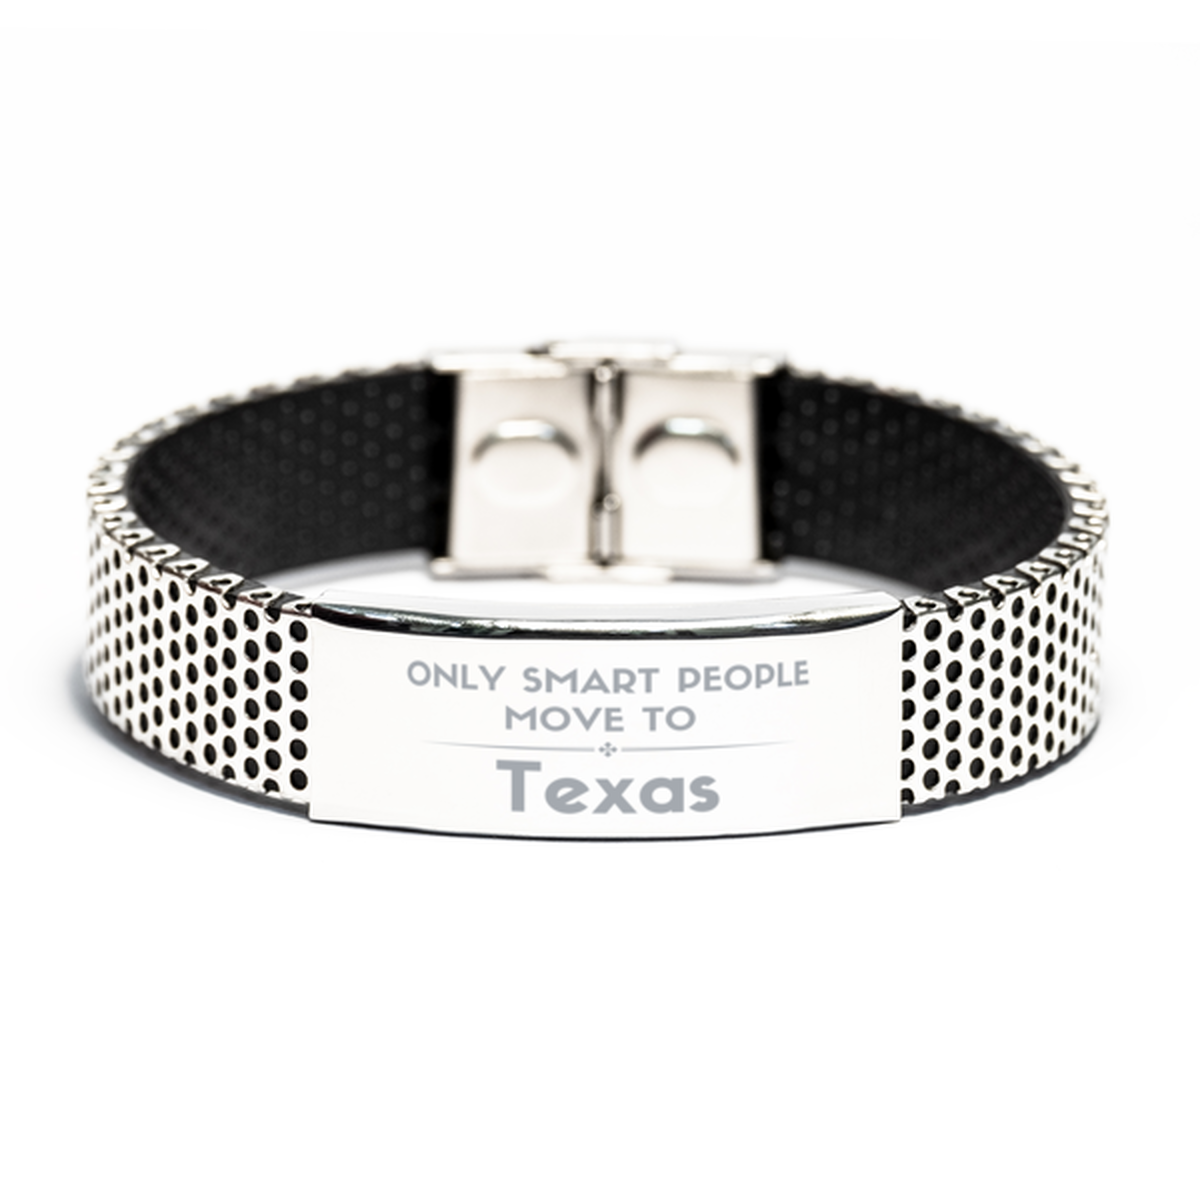 Only smart people move to Texas Stainless Steel Bracelet, Gag Gifts For Texas, Move to Texas Gifts for Friends Coworker Funny Saying Quote